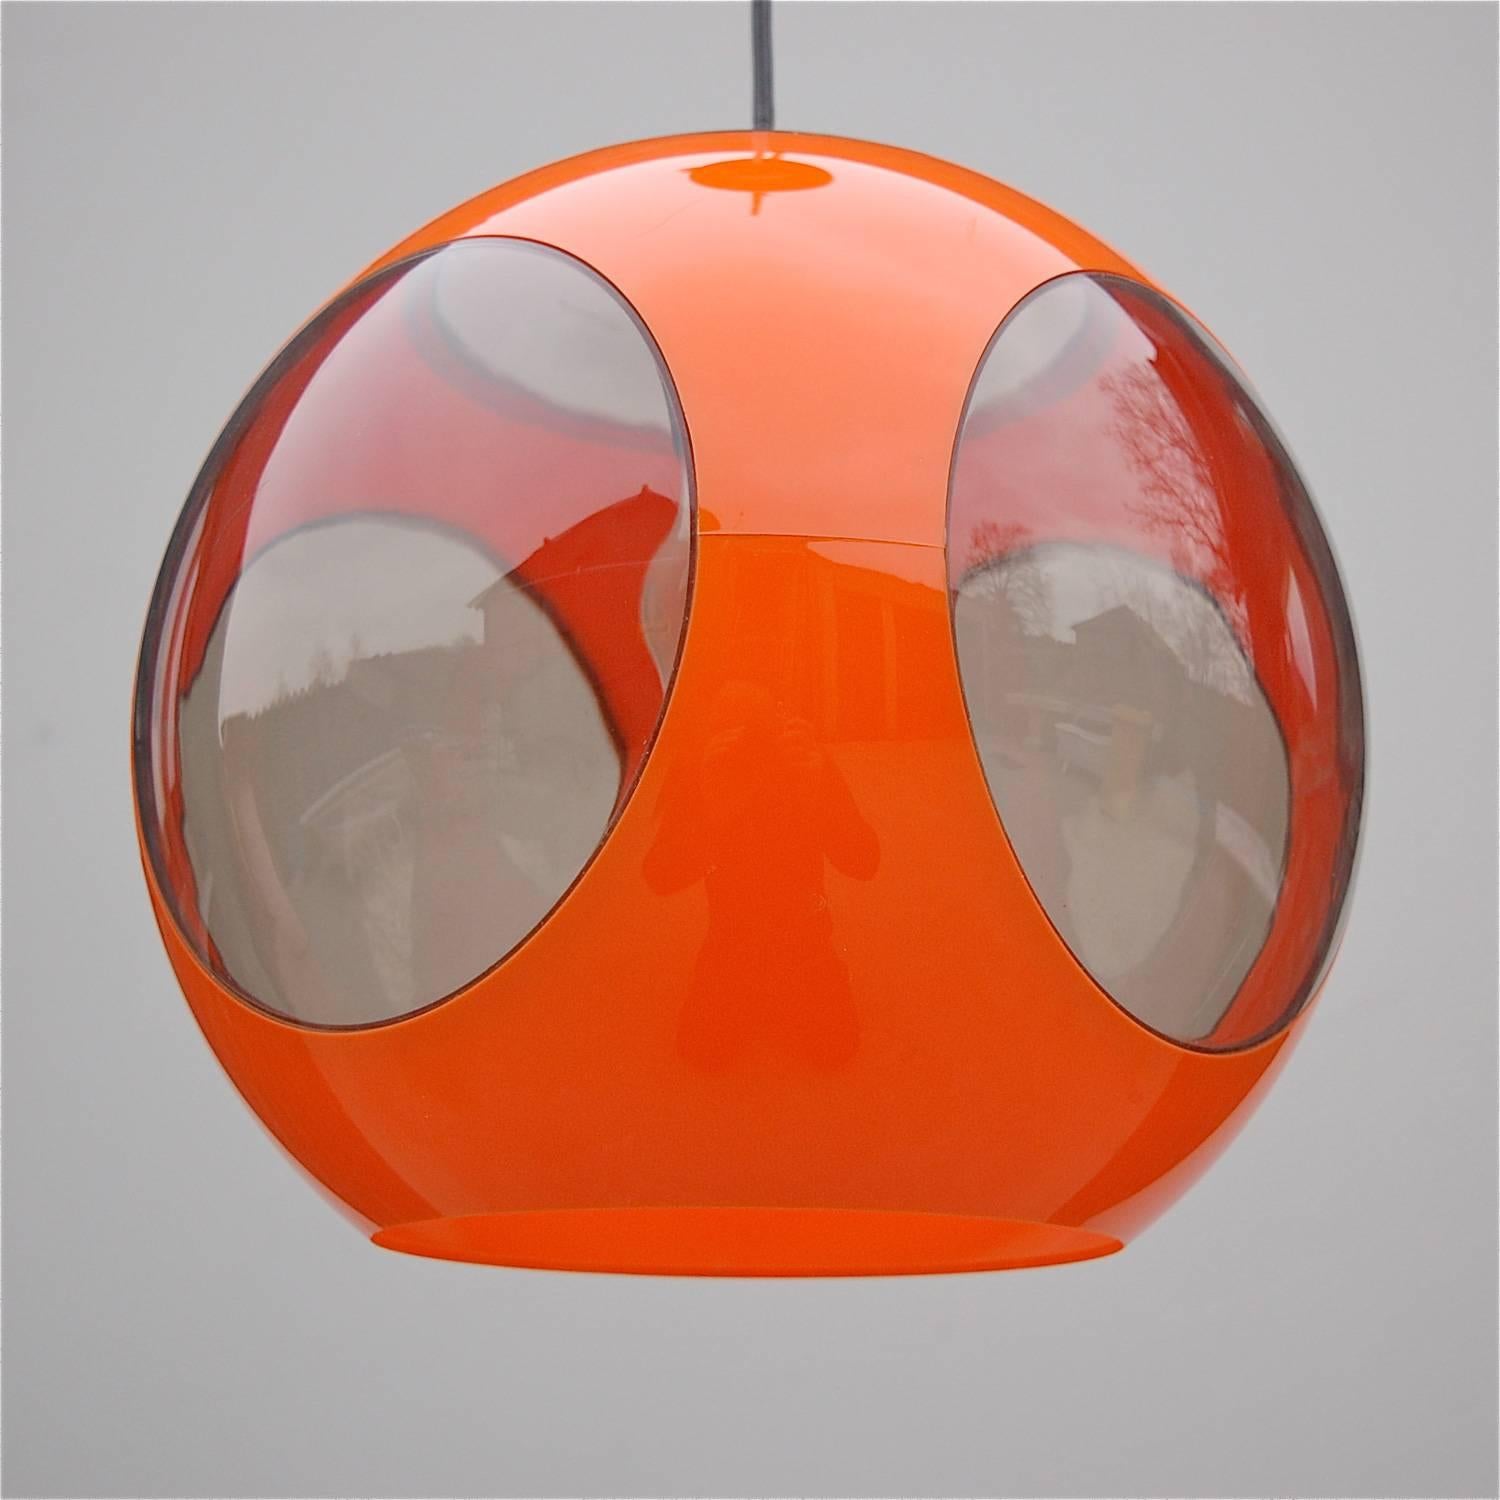 This UFO, space age lamp by designer Luigi Colani has an orange plastic circular body with smoked acrylic inserts and was produced in the 1970s. It is 30cm is diameter and hung from the ceiling it has a height of 55cm. In very good vintage